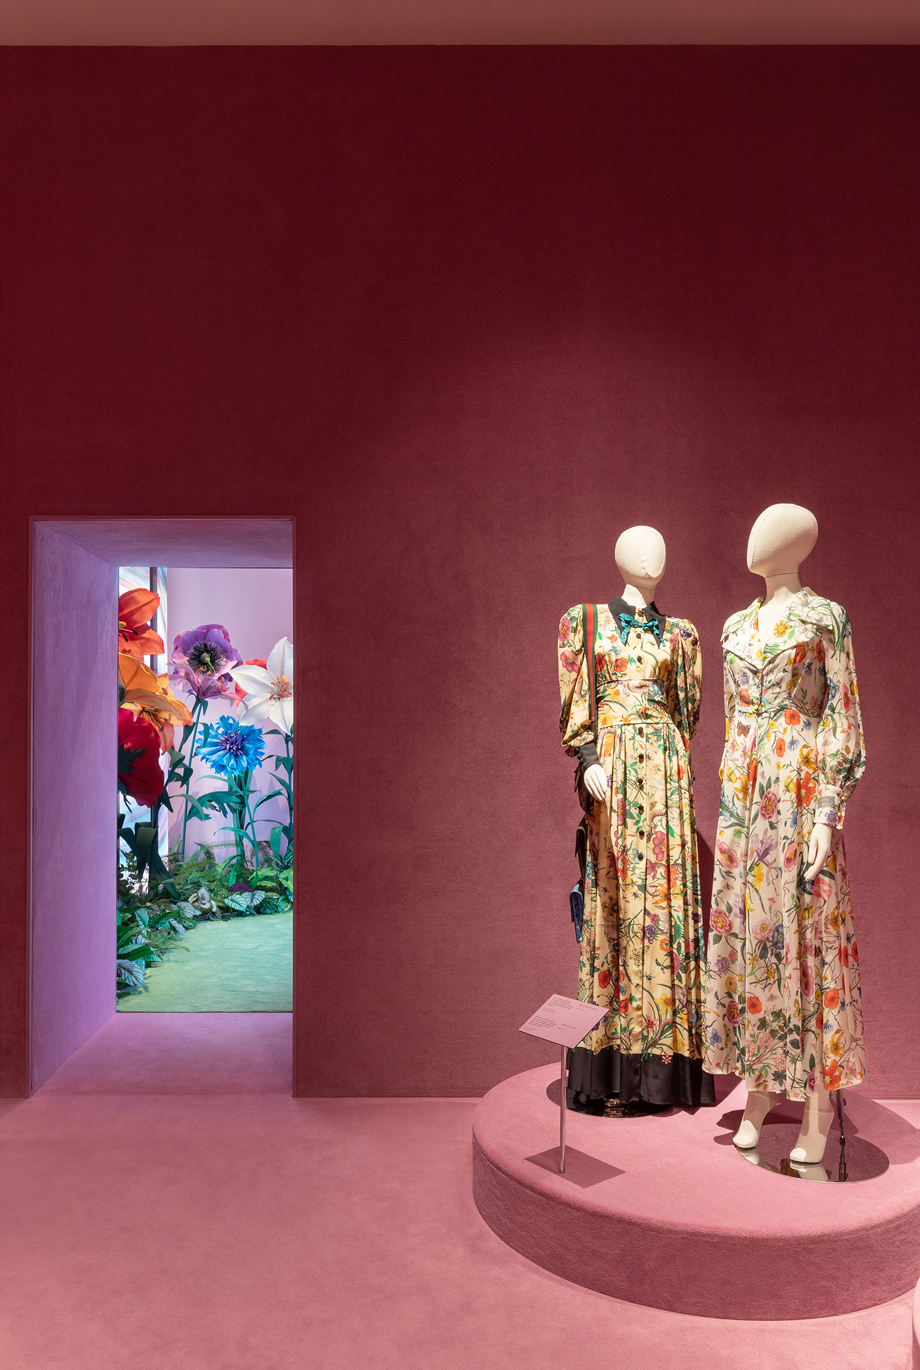 Gucci design in a pink room with mannequin